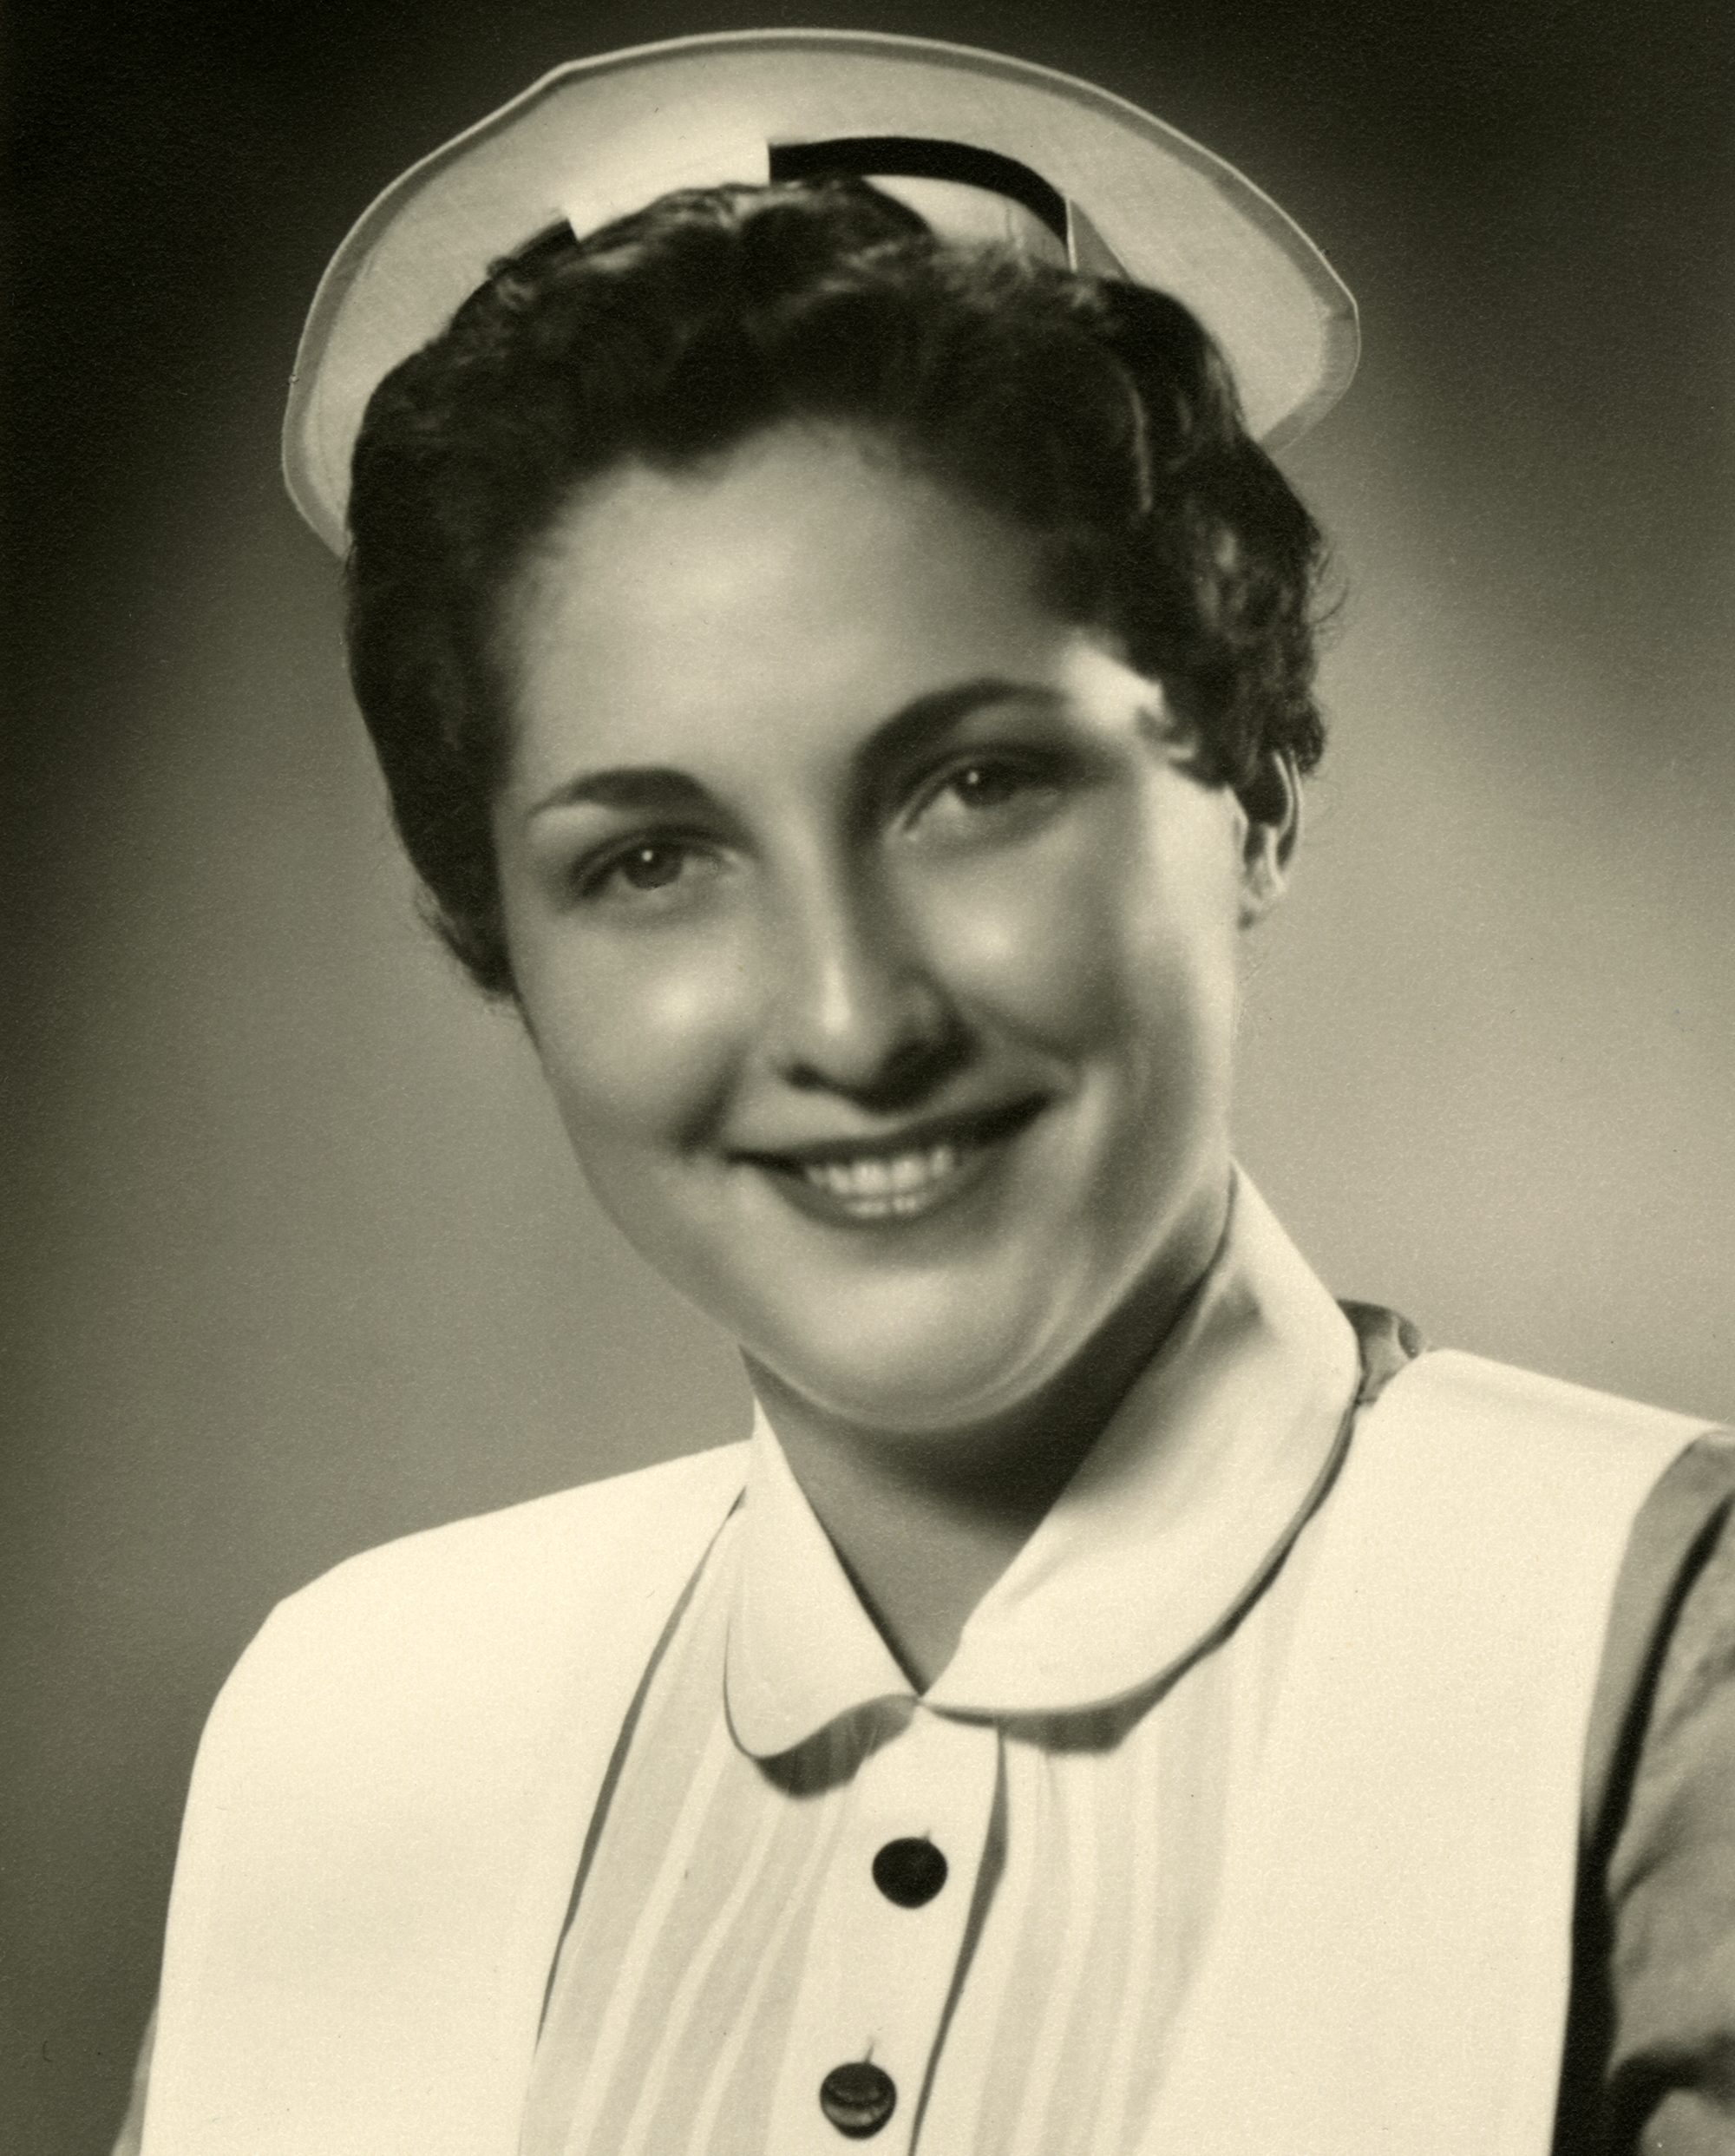 Esther Schrier trained as a nurse in her late teens and worked at the Jewish General Hospital in Montreal. (Submitted by Lloyd Schrier)